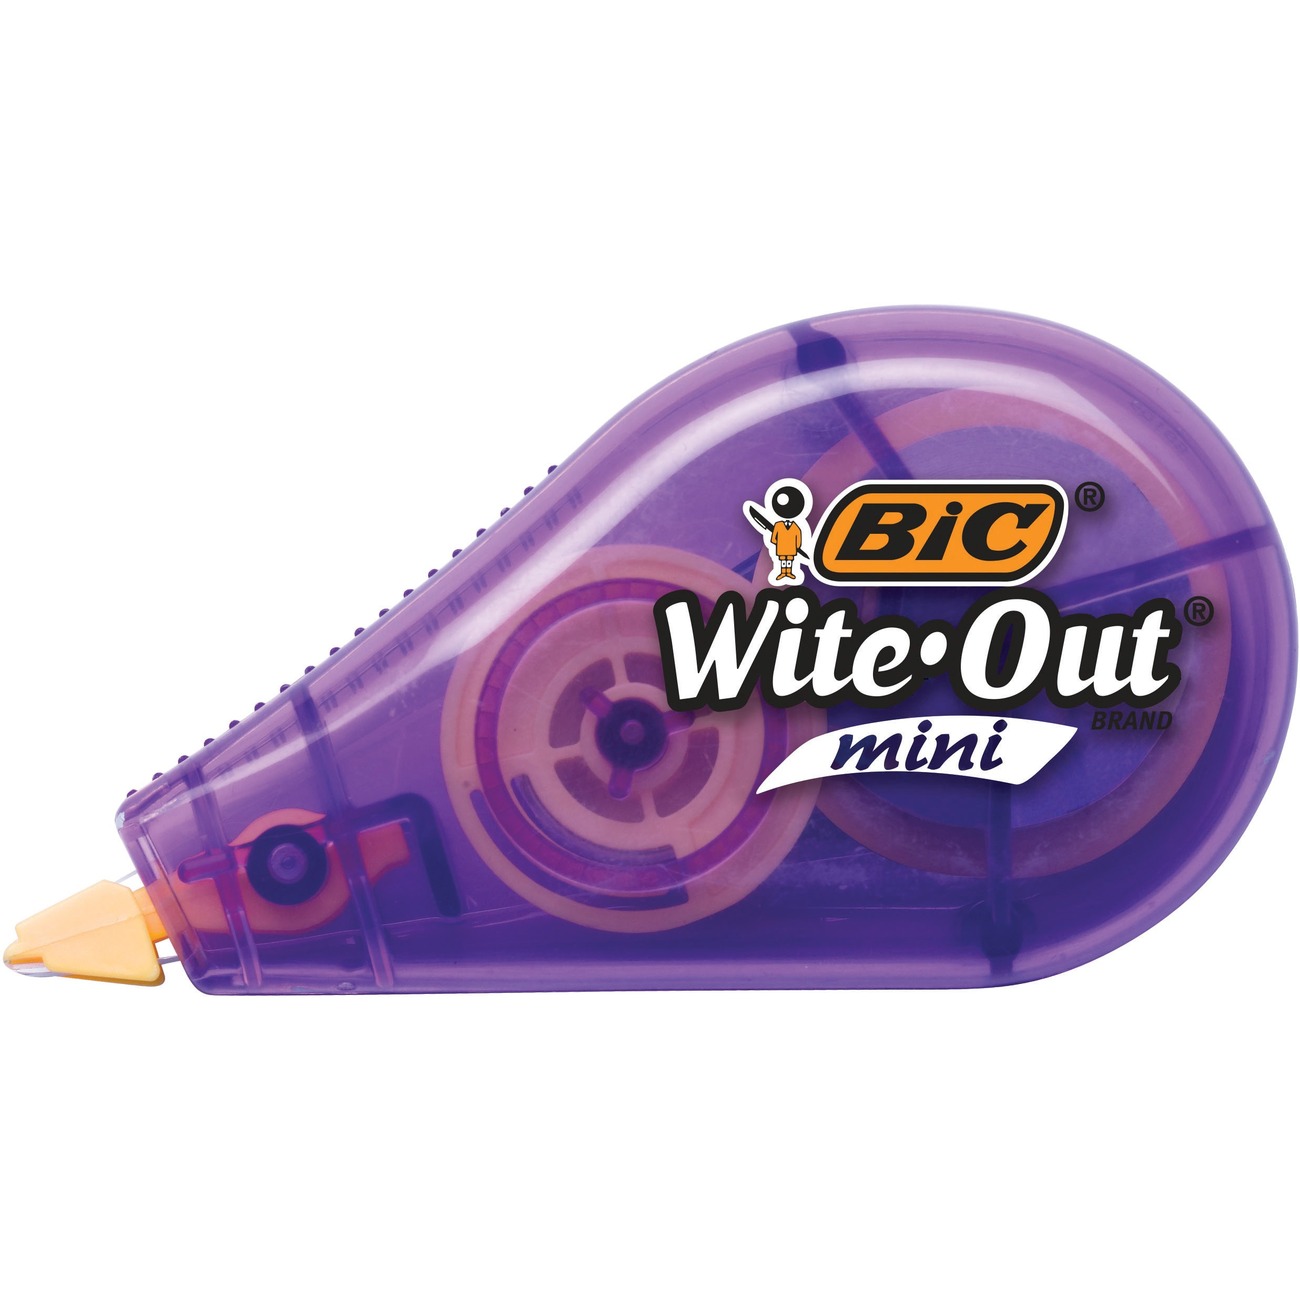 Bic Wite-Out Correction Pen (box)